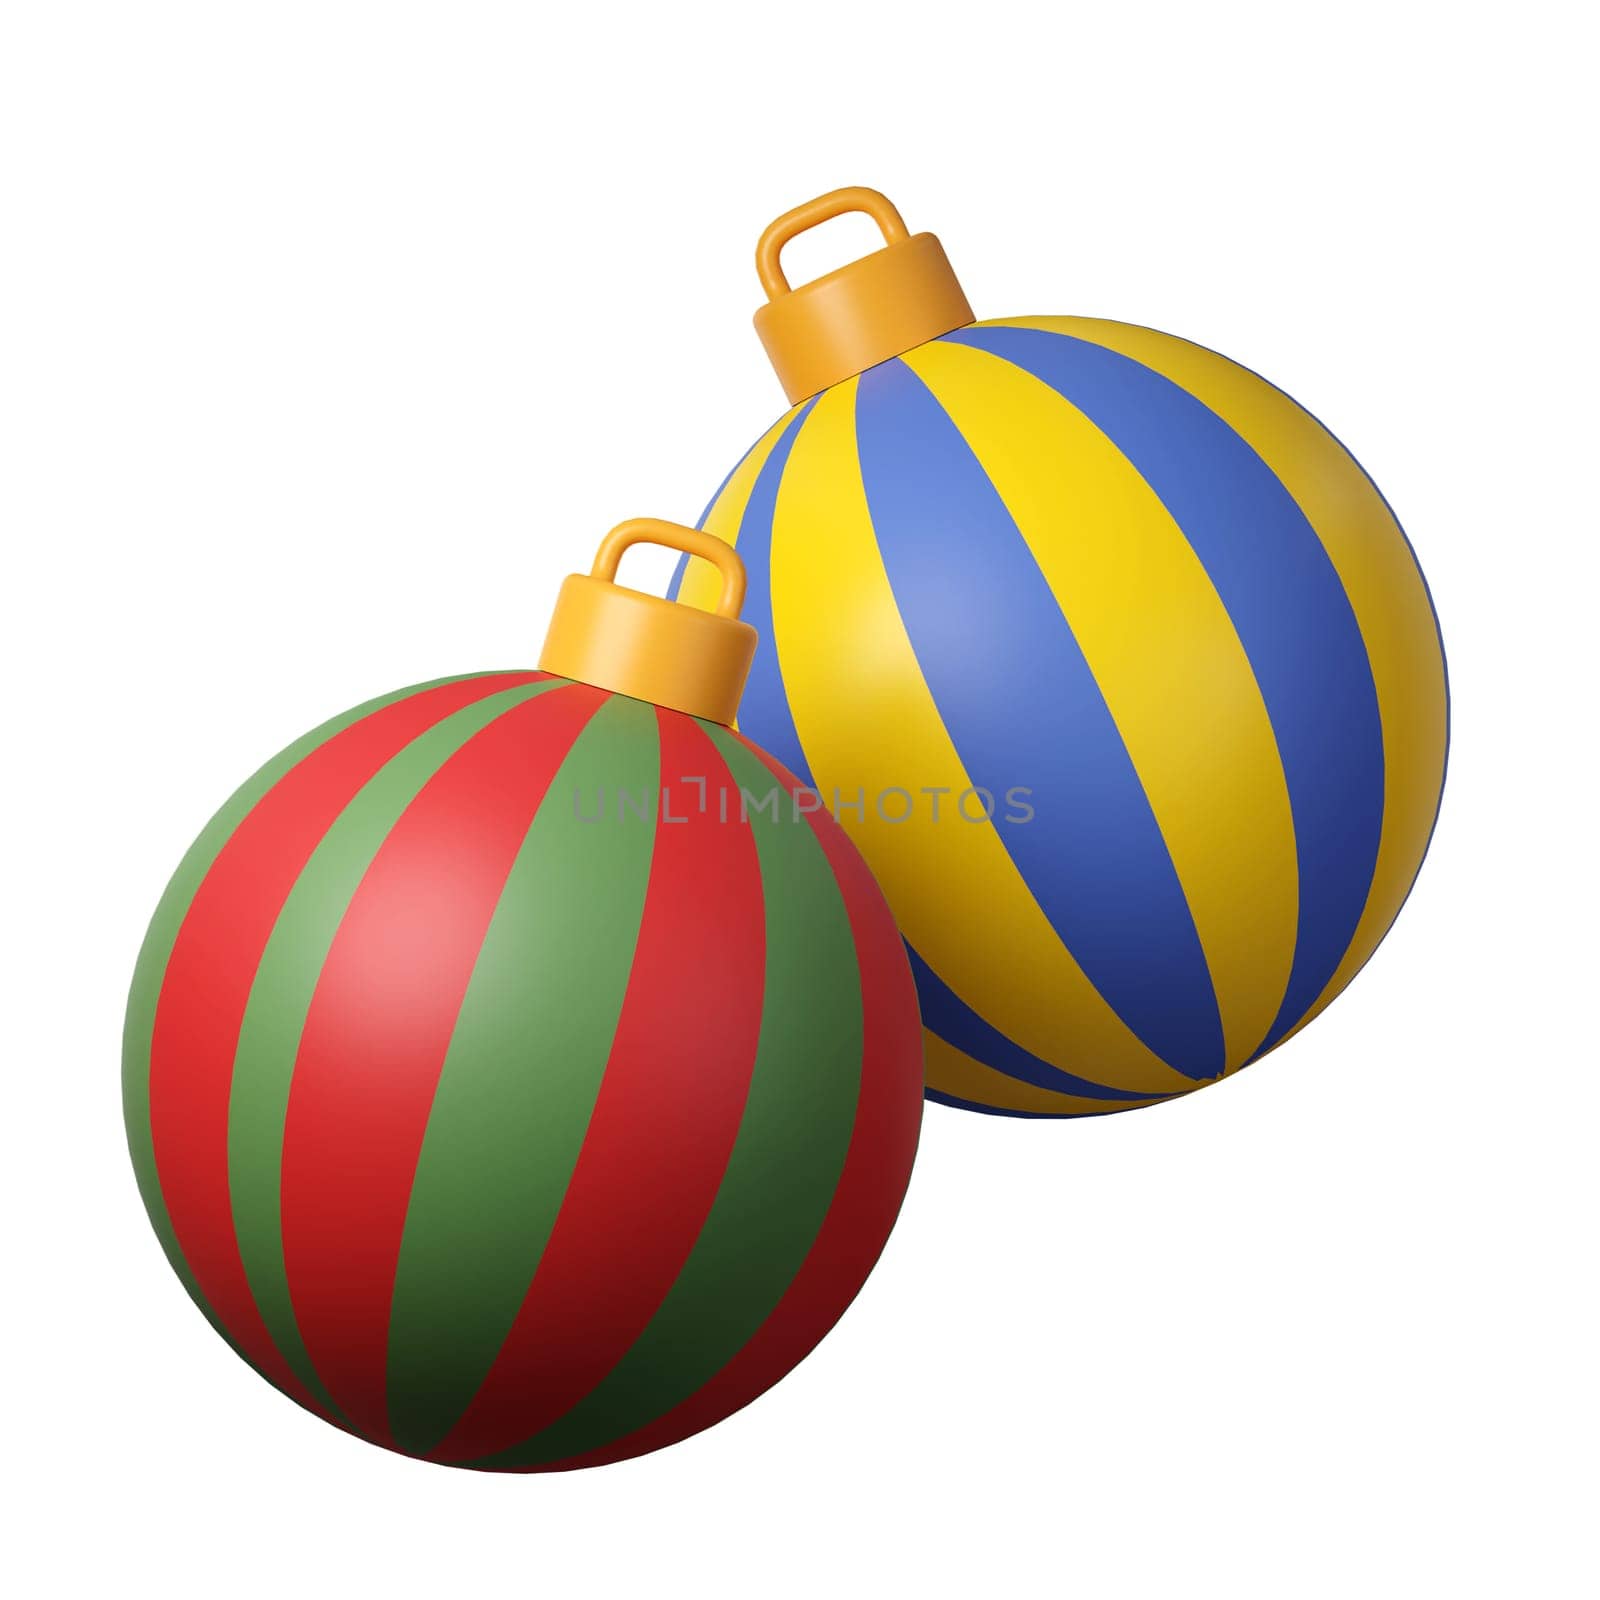 3d Christmas ball icon. minimal decorative festive conical shape tree. New Year's holiday decor. 3d design element In cartoon style. Icon isolated on white background. 3d illustration.